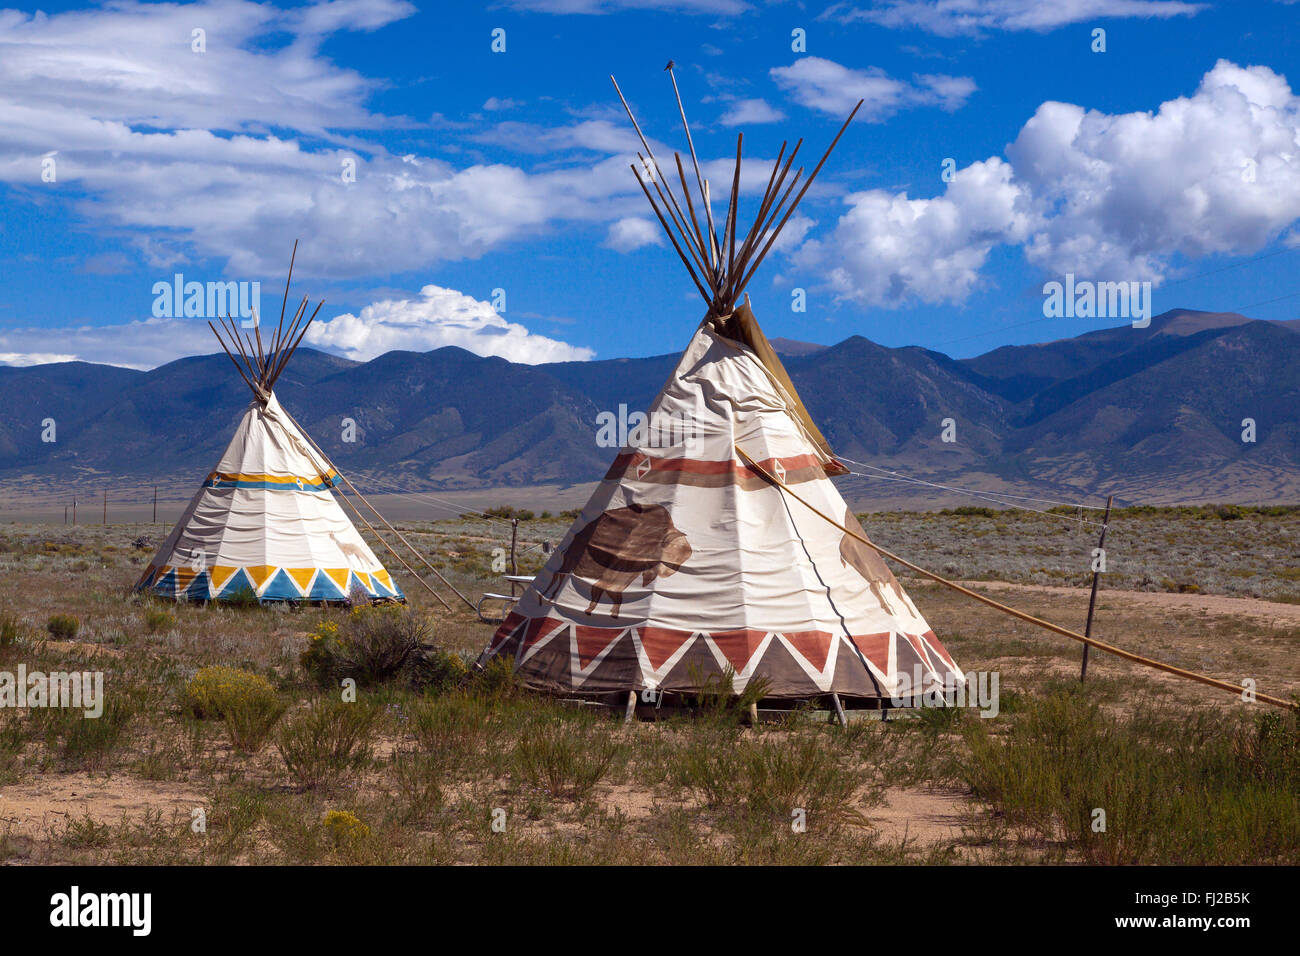 TEEPEES are used as accomodations at JOYFUL JOURNEYS HOT SPRINGS - MOFFAT COLORADO Stock Photo